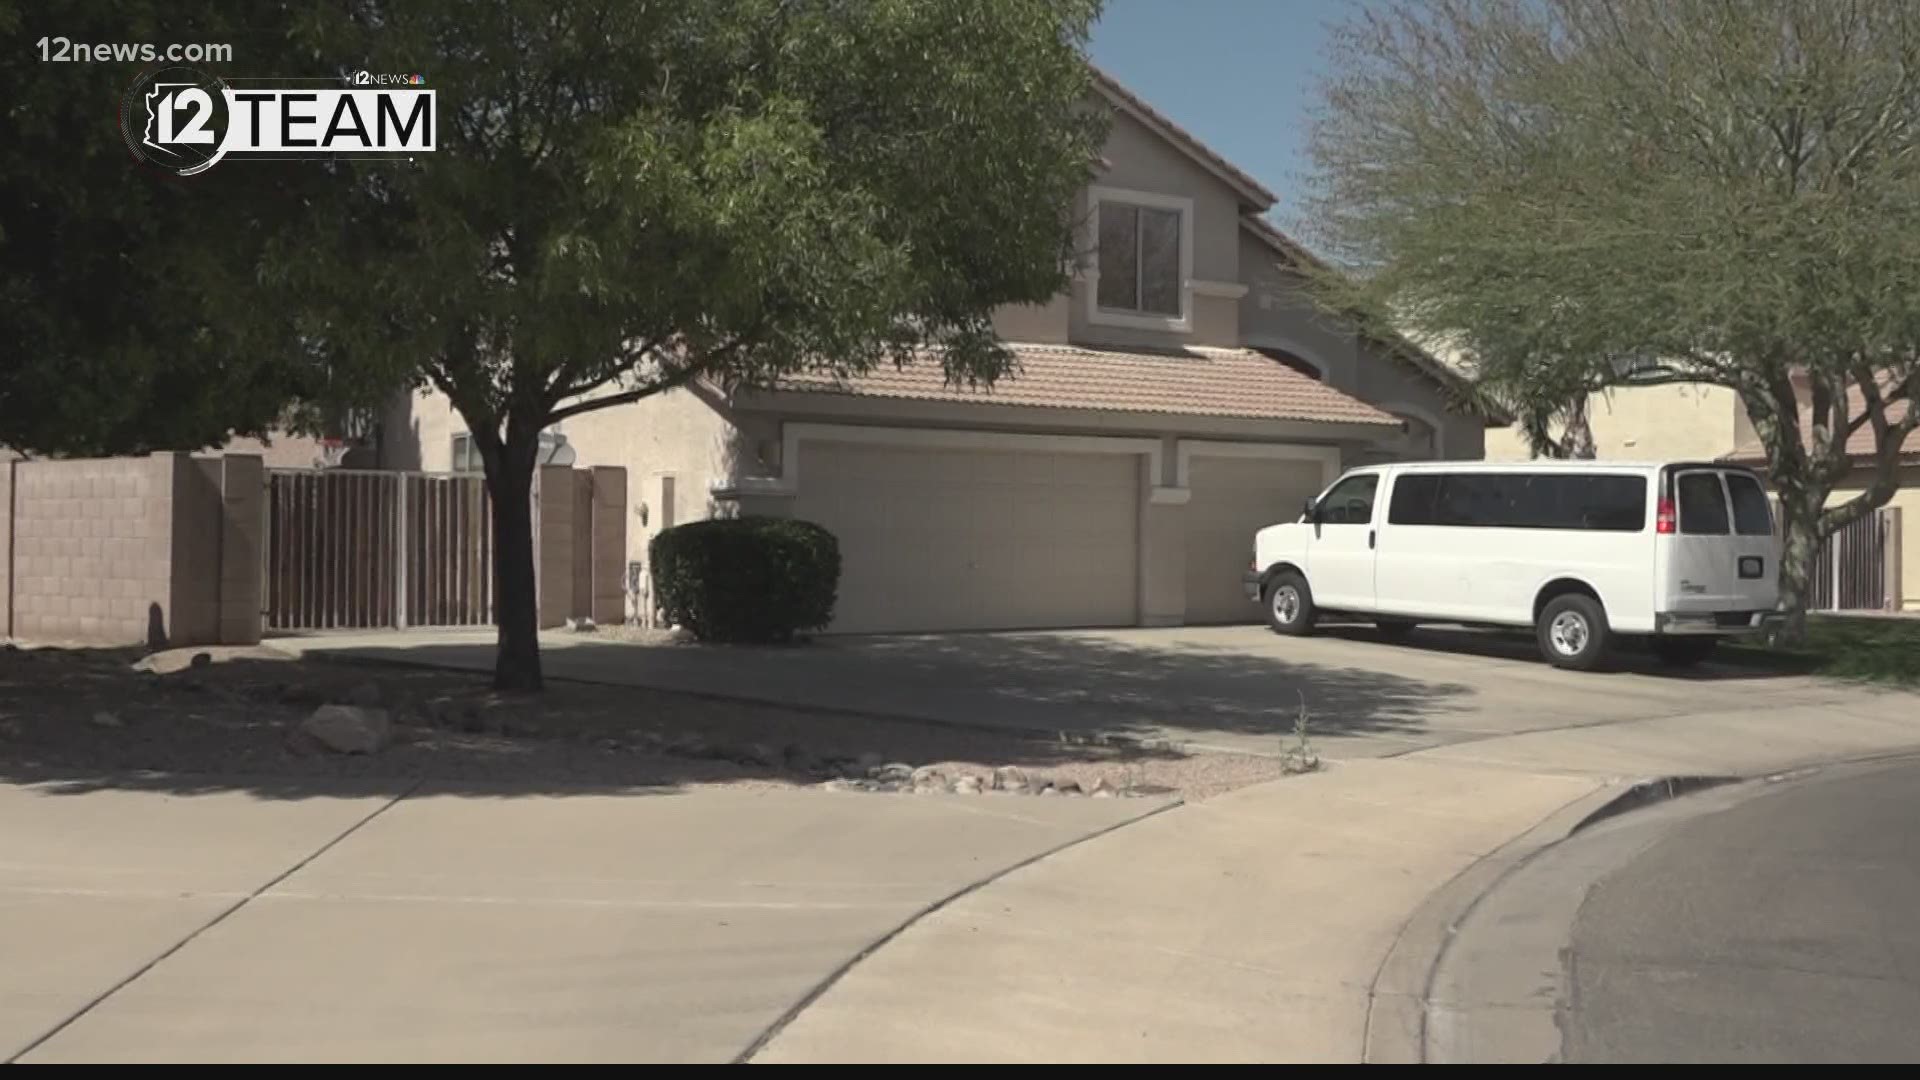 Police records show that 176 calls were made to police concerning two group homes in Gilbert. One of those homes is at the center of a murder investigation.